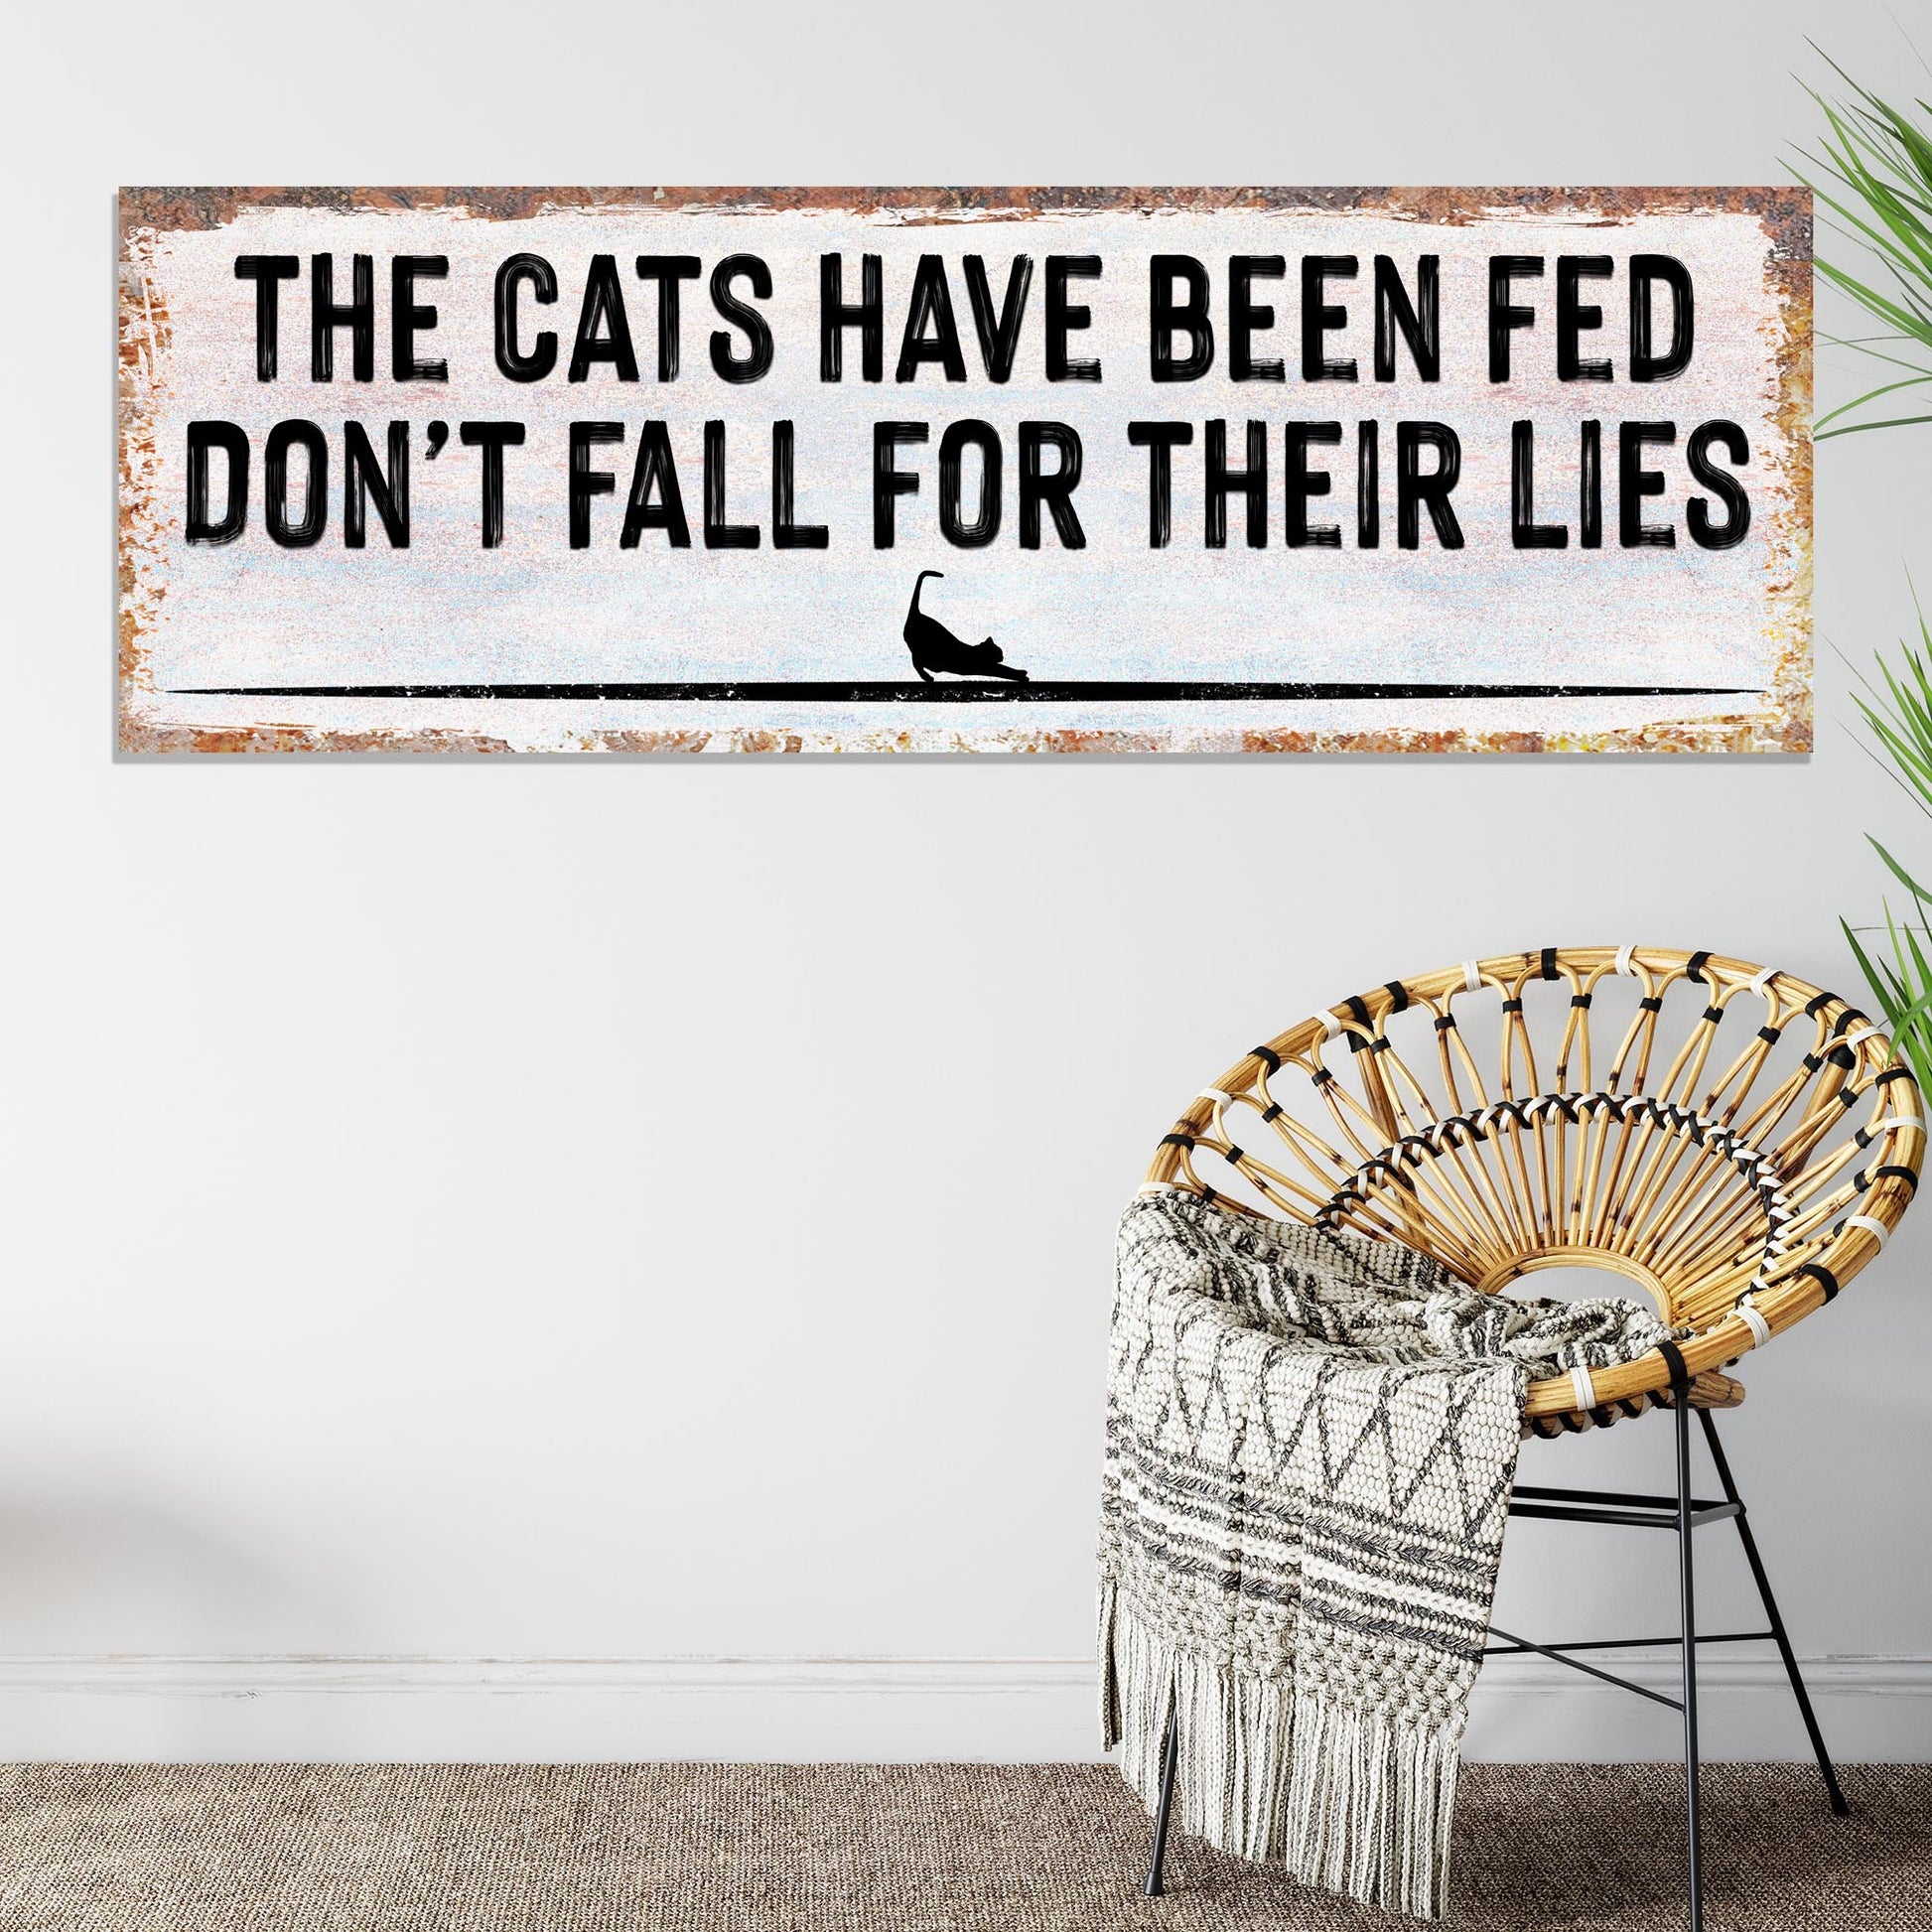 The Cats Have Been Fed Don't Fall For Their Lies Sign - Image by Tailored Canvases